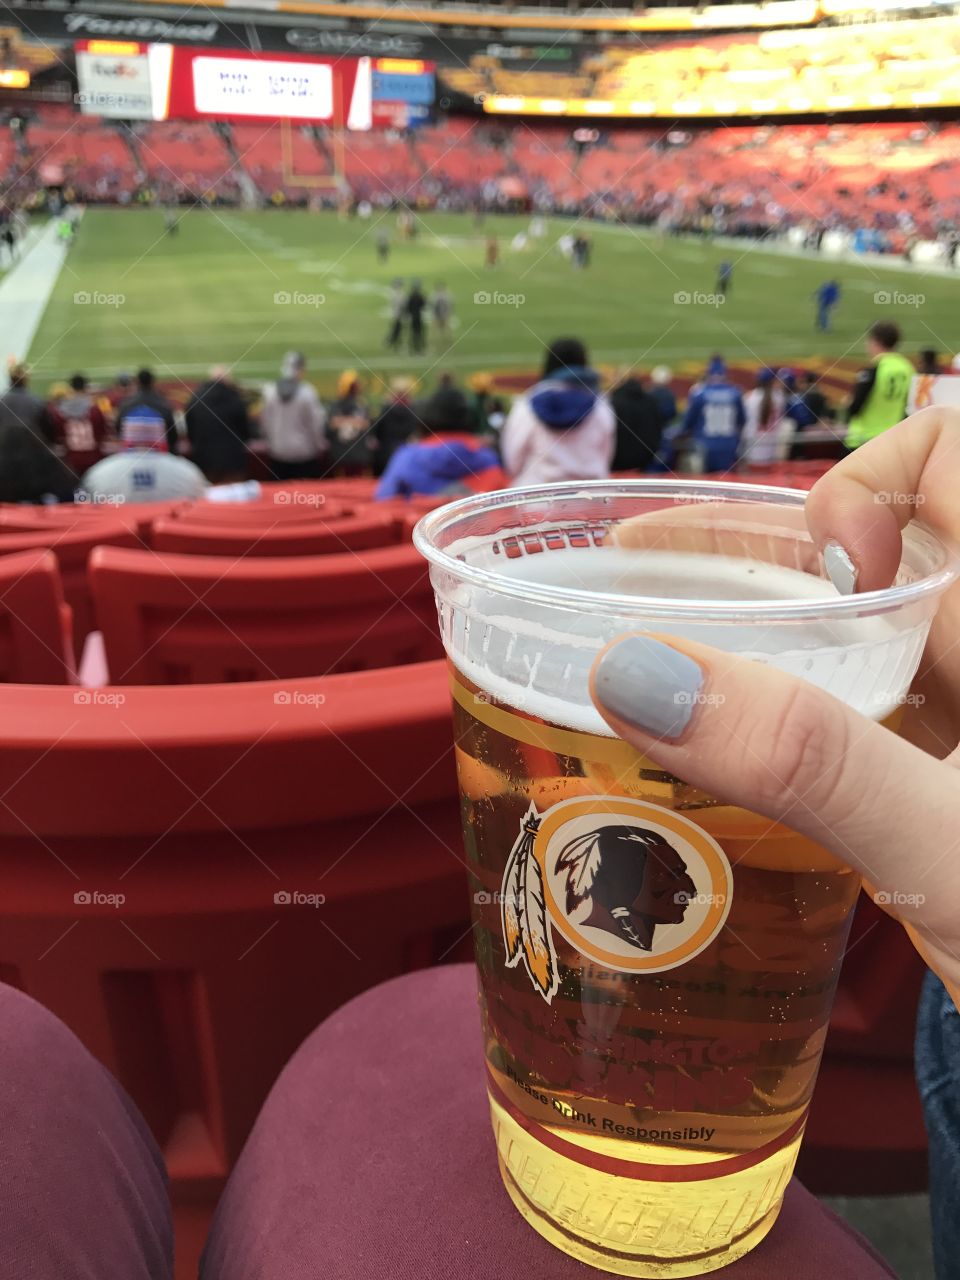 Raise one to the Redskins!